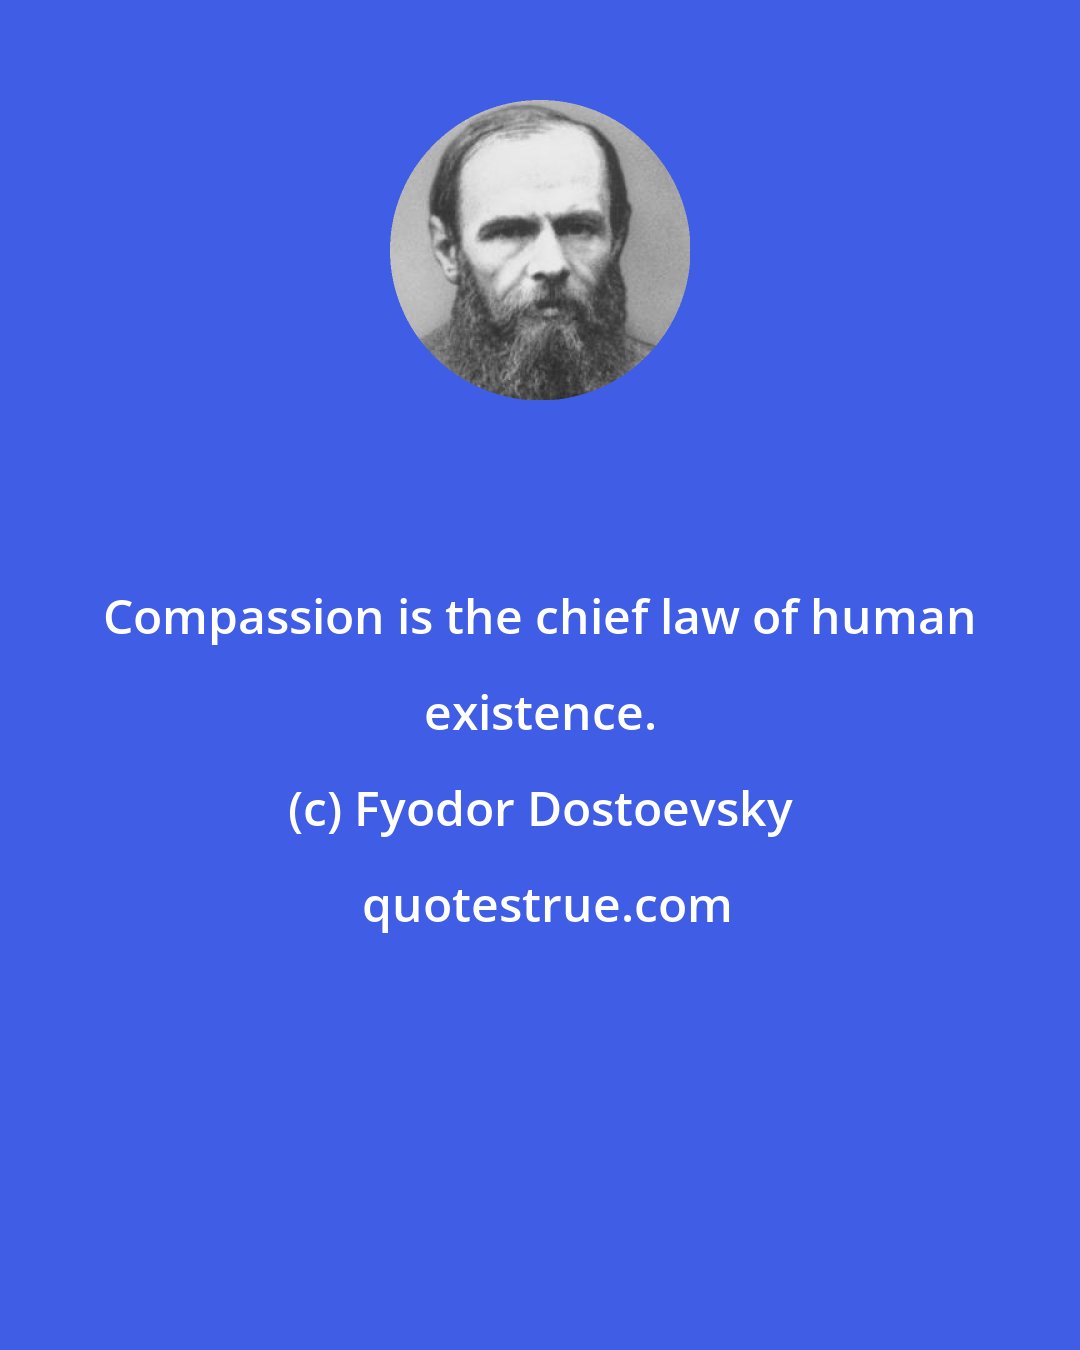 Fyodor Dostoevsky: Compassion is the chief law of human existence.